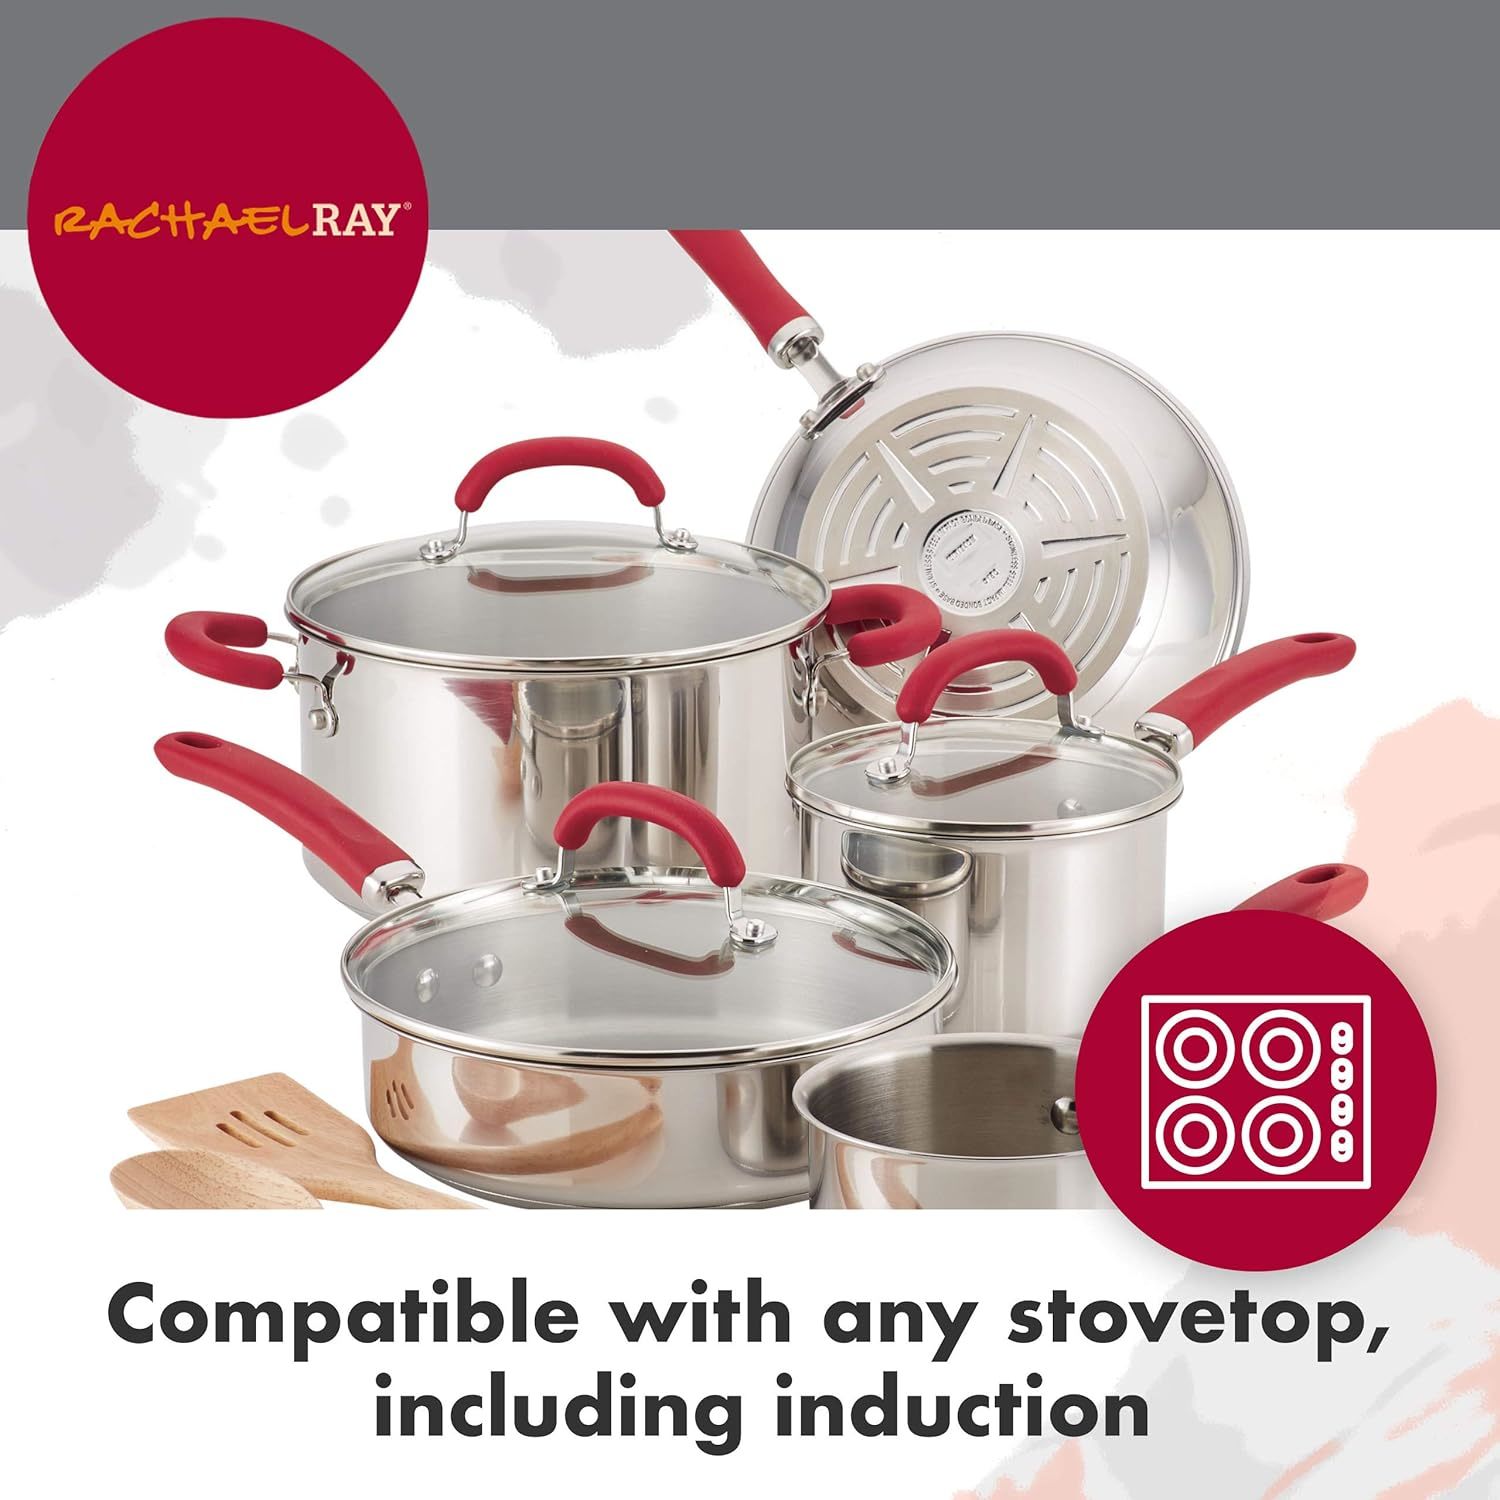 Rachael Ray, Create Delicious 10-Piece Stainless Steel Cookware Set - Zola